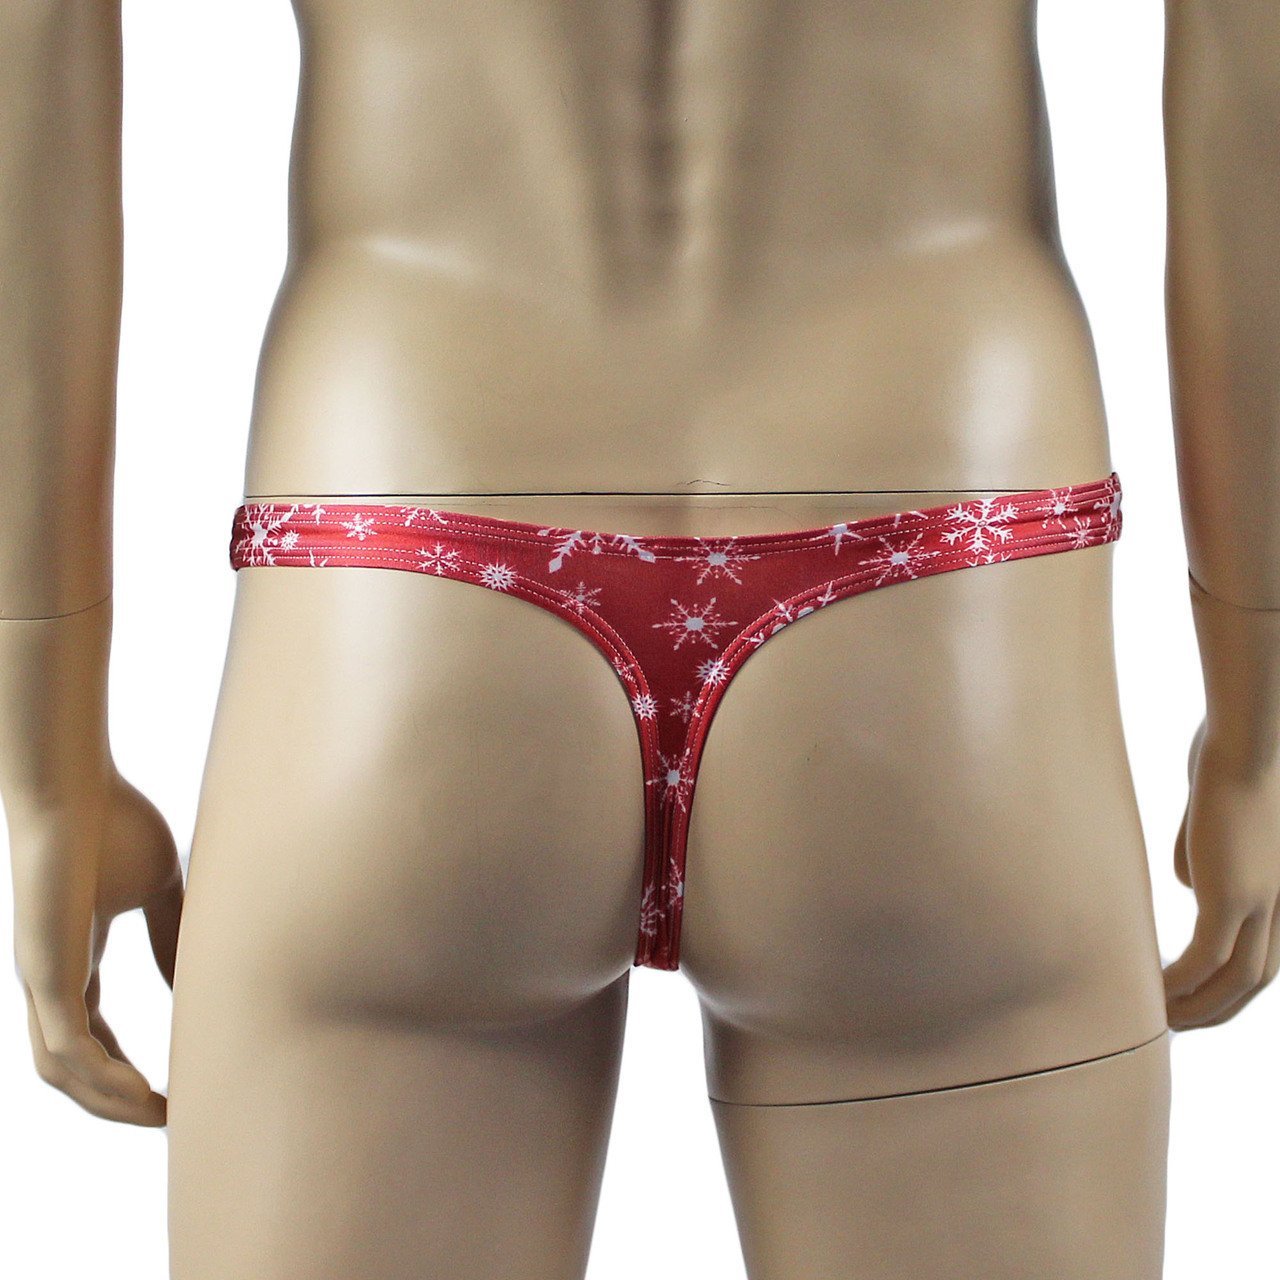 Mens Christmas Snow Flake G string Thong Xmas Underwear Red and White